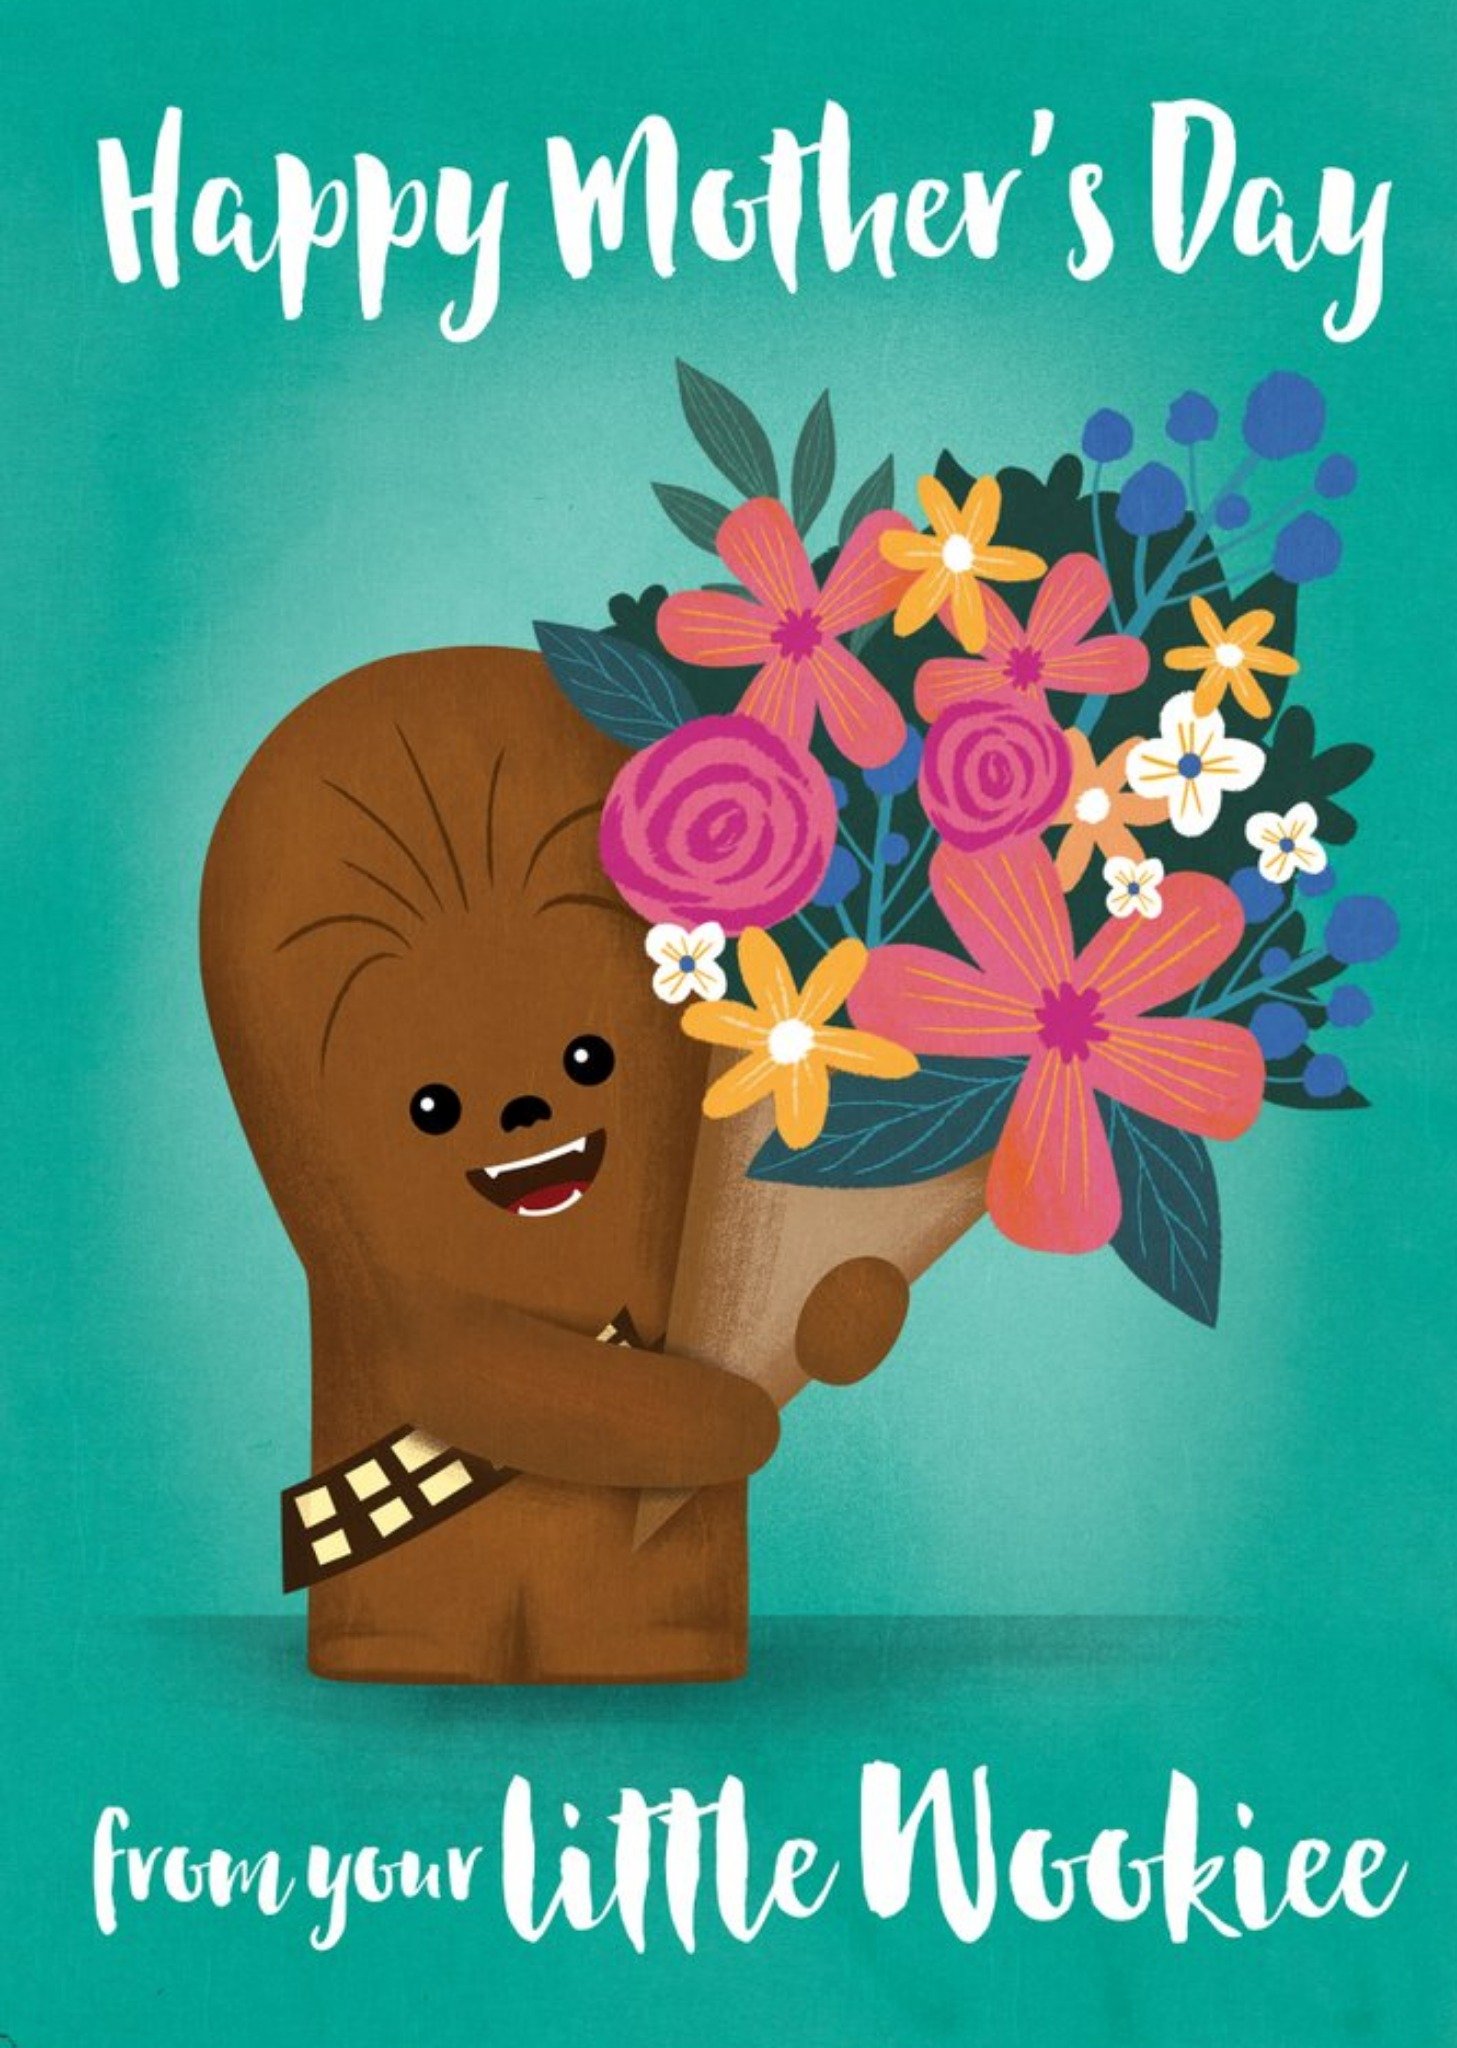 Disney Star Wars Happy Mother's Day From Your Little Wookie Card, Large